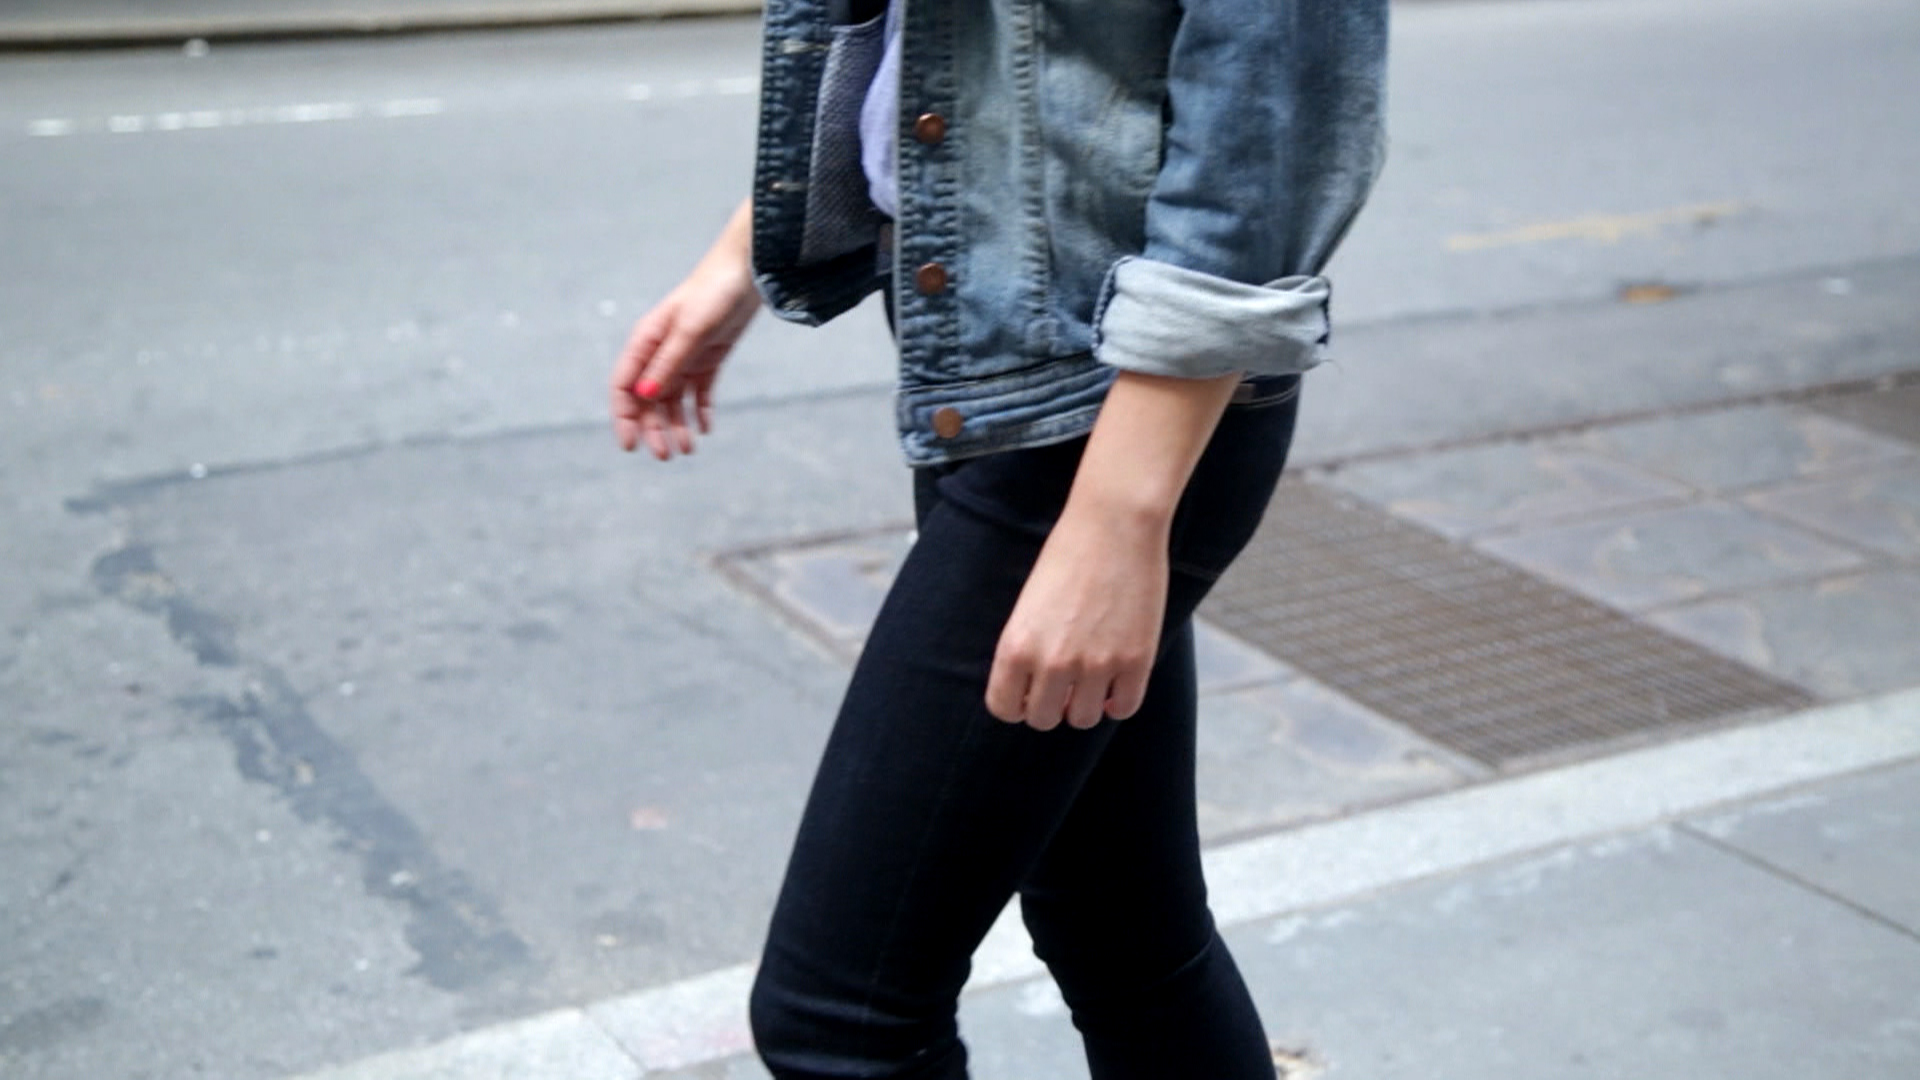 WARNING: Skinny jeans could be a serious health hazard